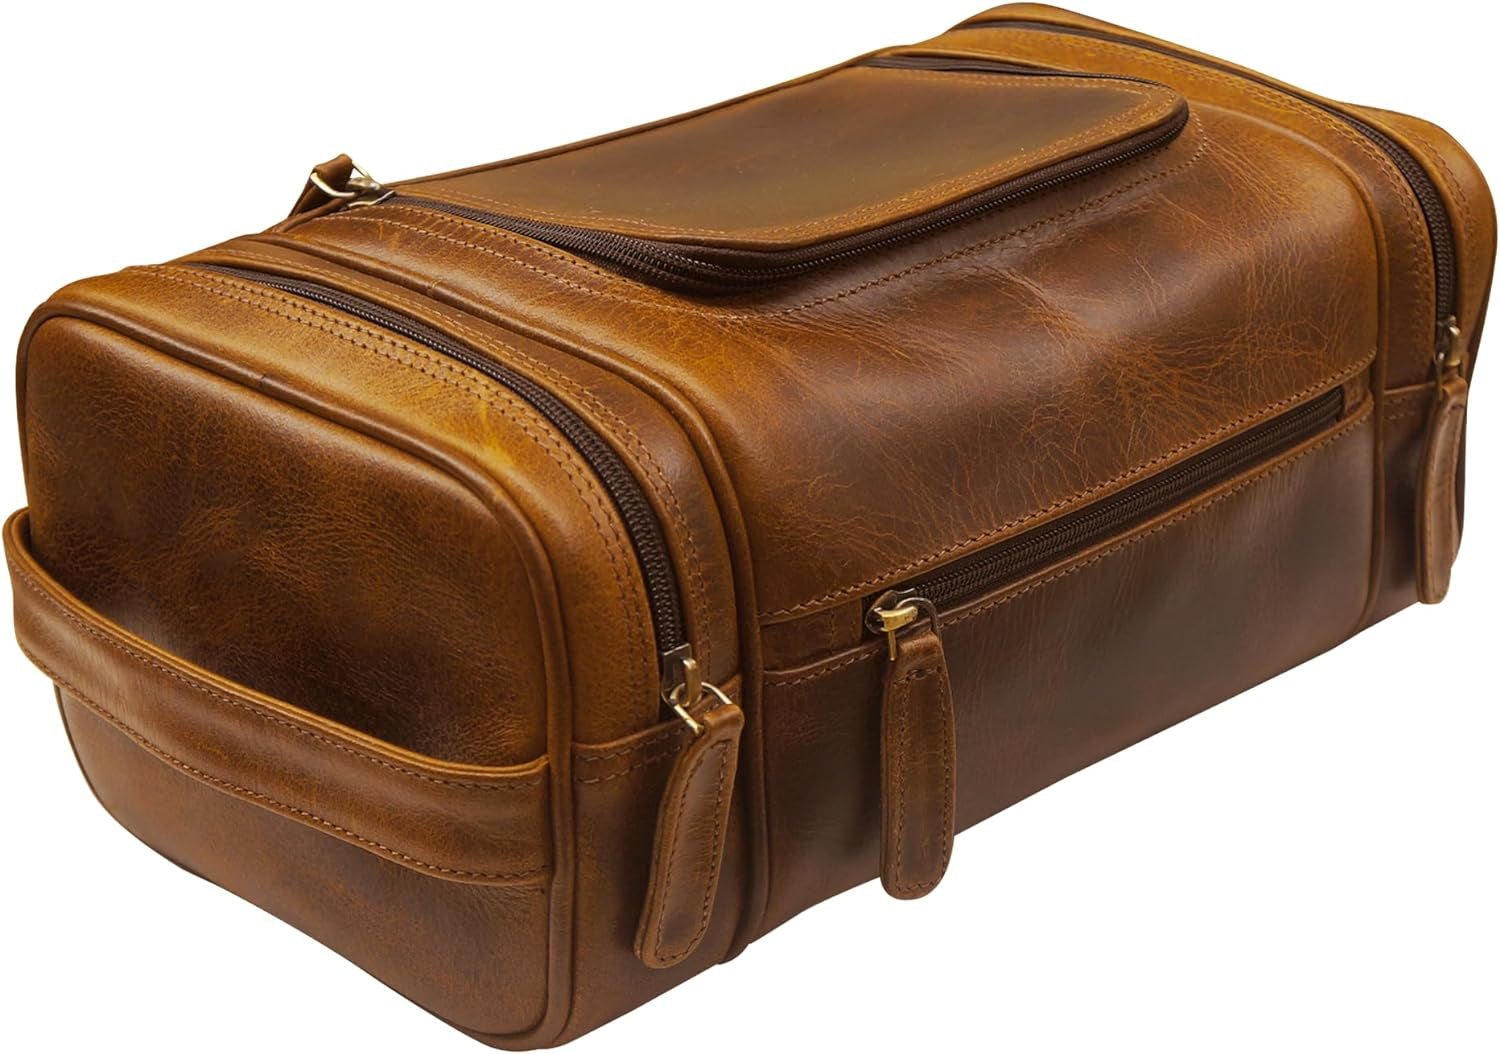 "Luxurious Leather Toiletry Bag - Stylish Dopp Kit for Men and Women - Ultimate Travel Companion for Toiletries and Shaving"